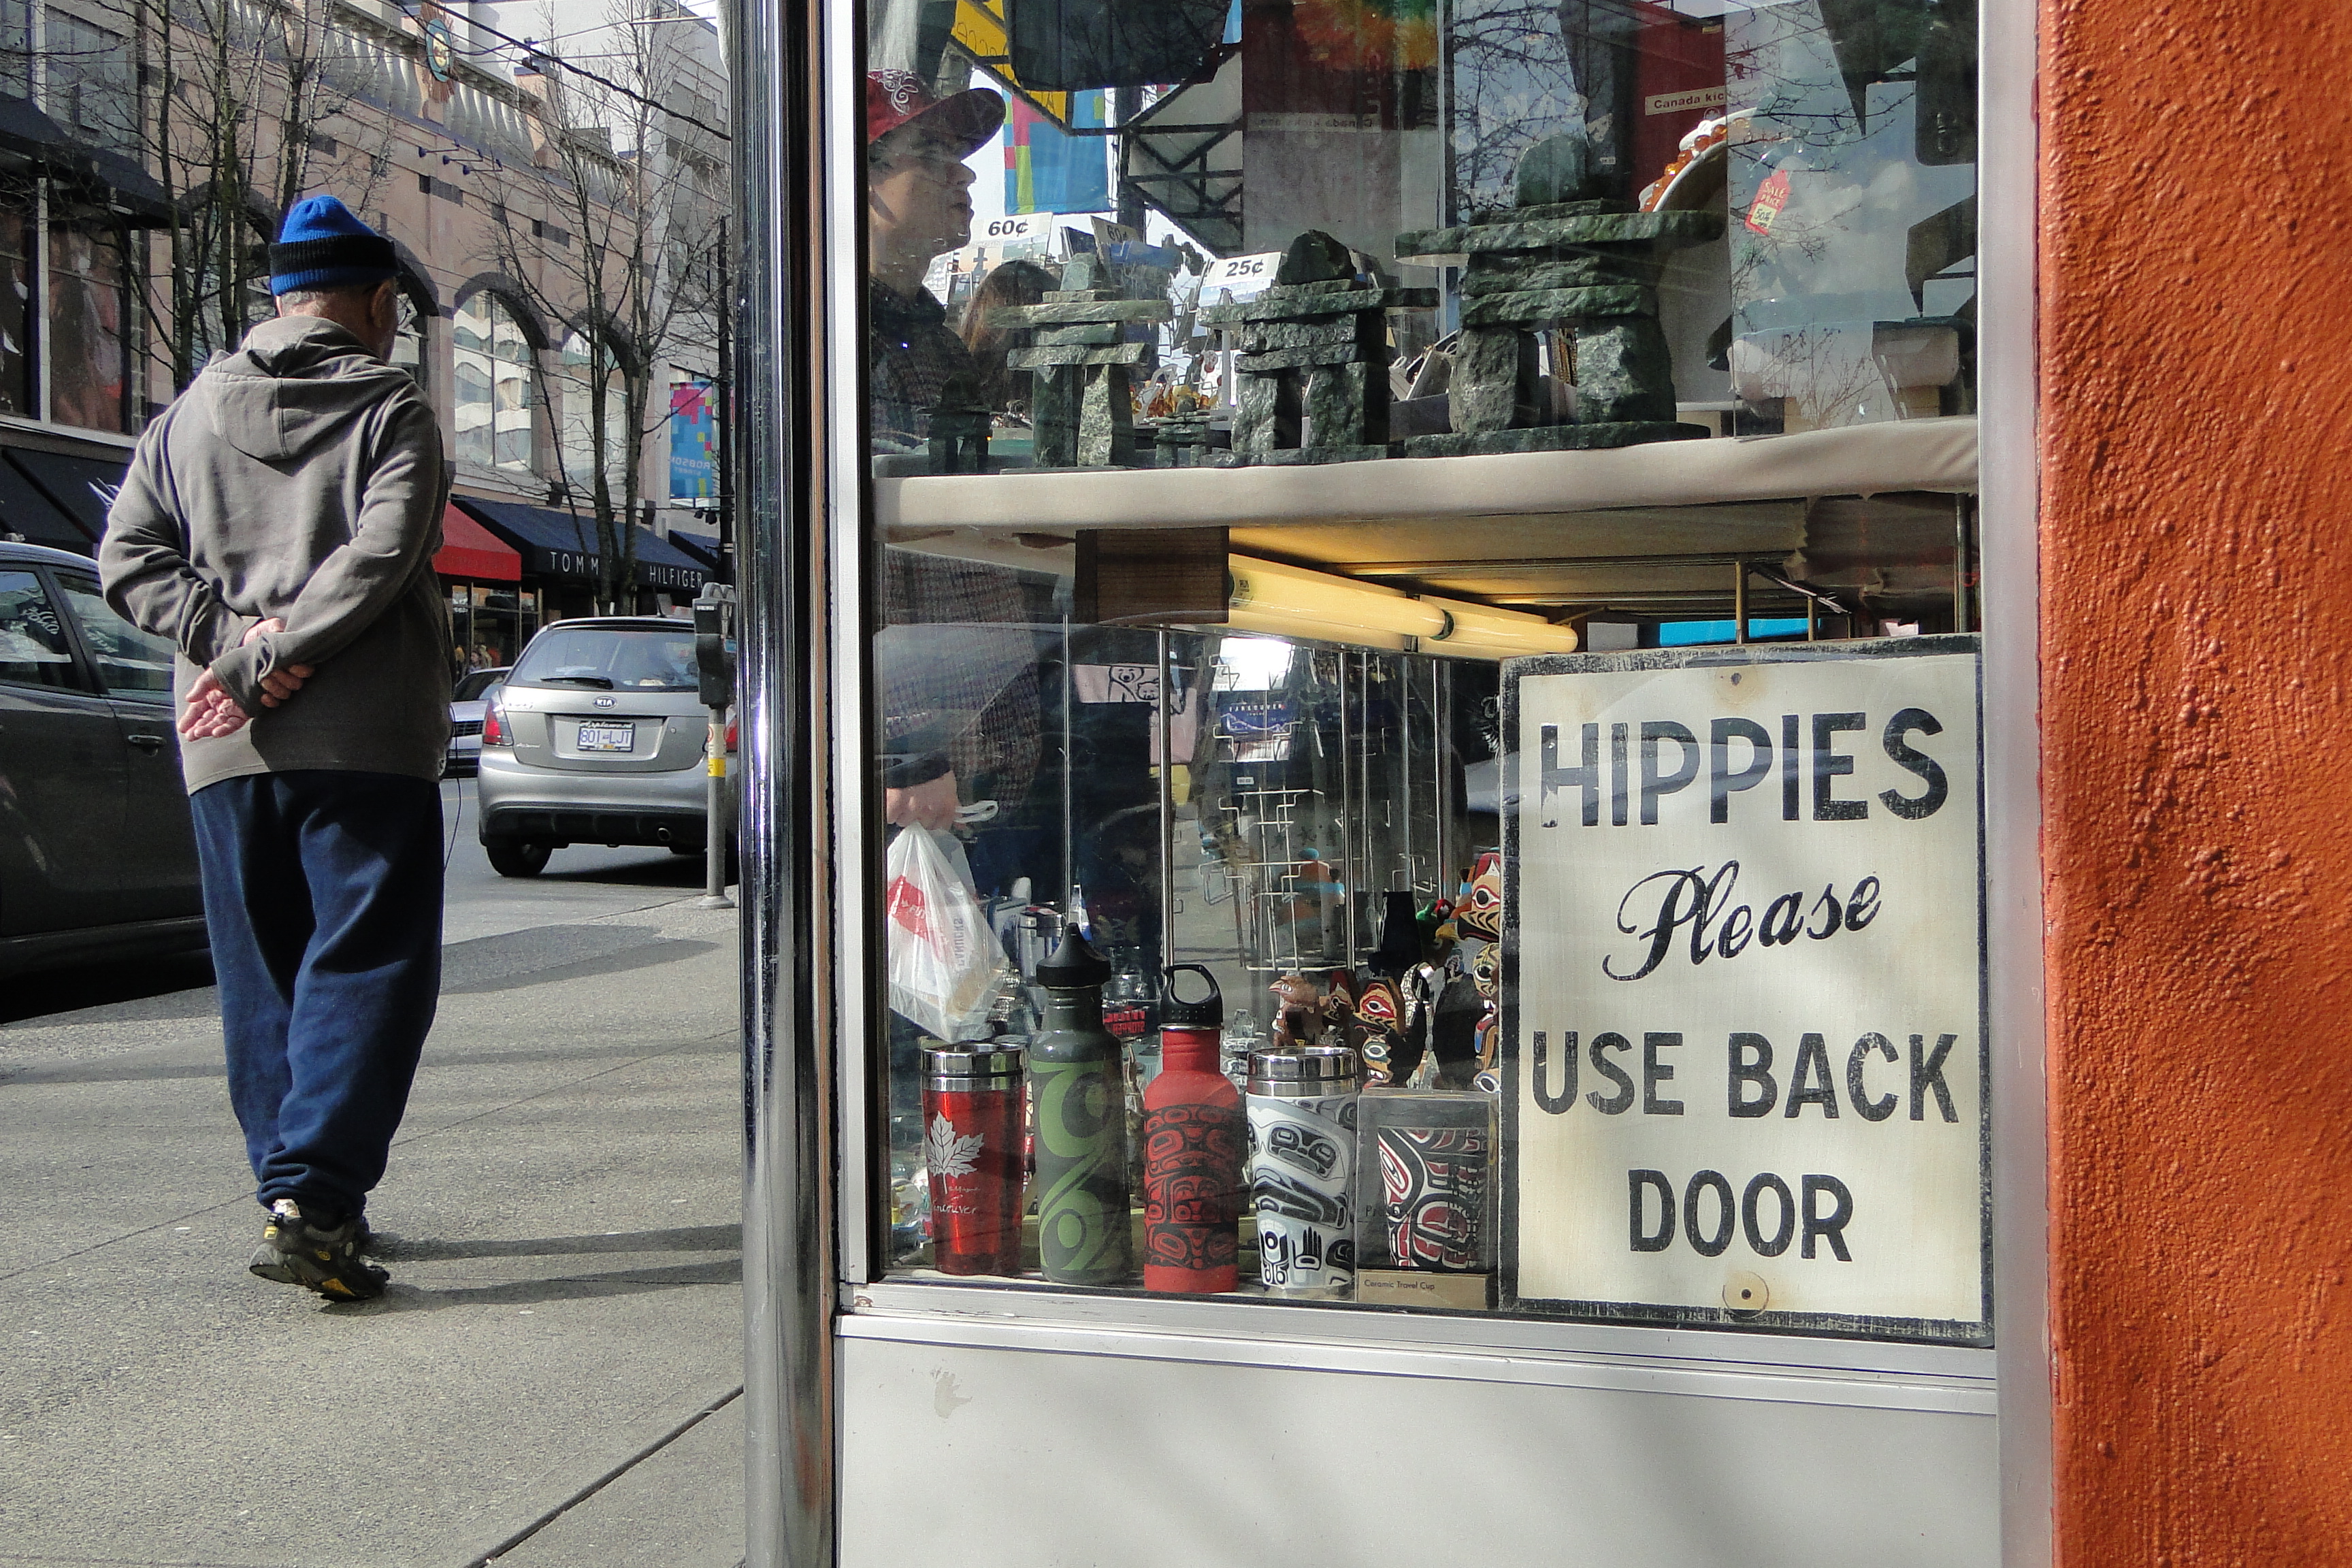 A sign in a storefront says "Hippies please use back door."